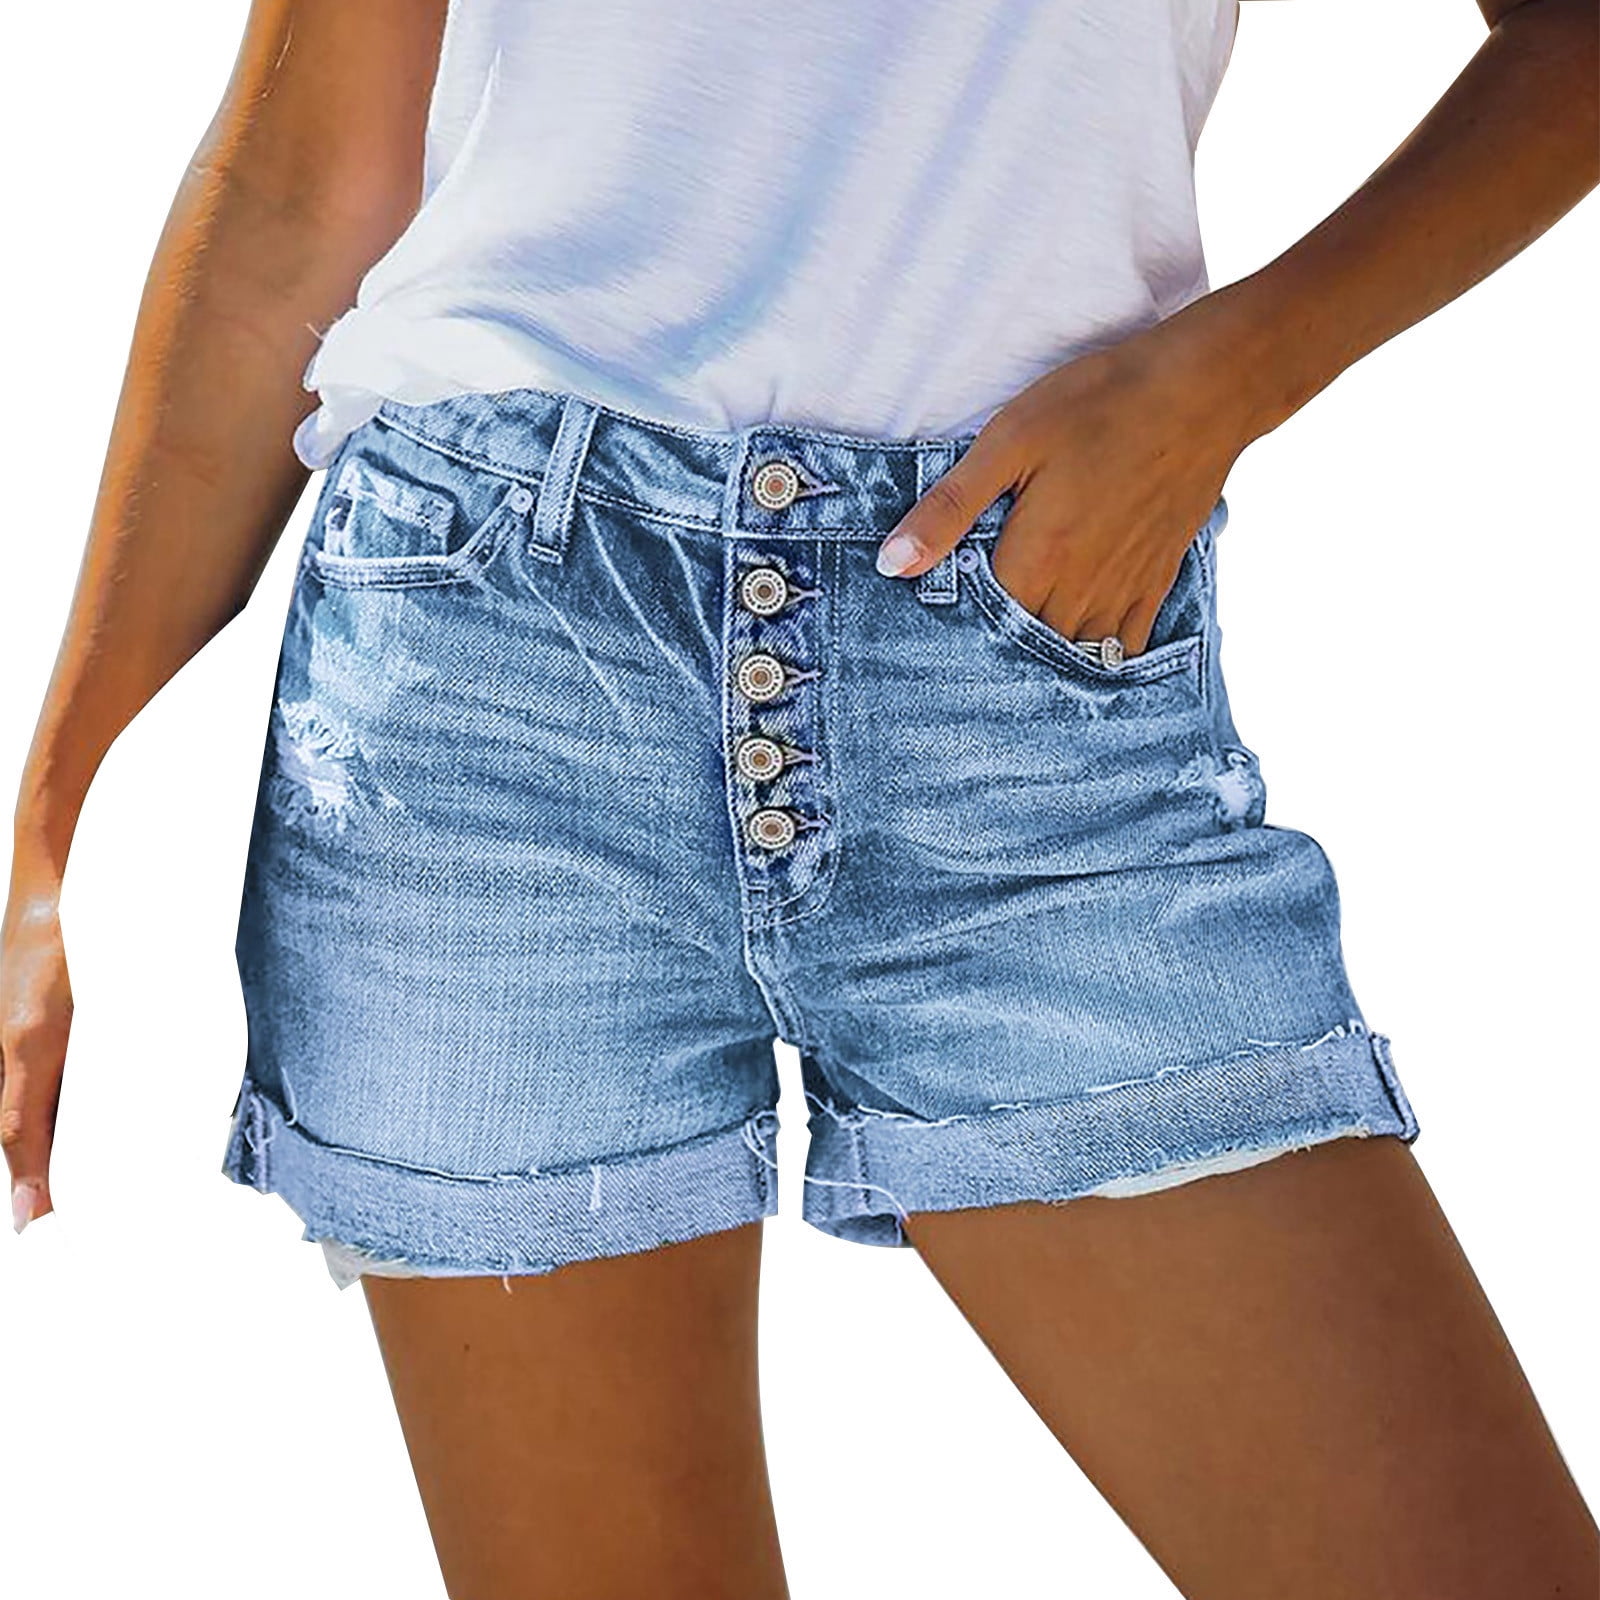 Denim Shorts for Women Mid Rise Casual Summer Distressed Cuffed Rolled Hem  Jeans Shorts Ladies Trendy Ripped Shorts - Walmart.com